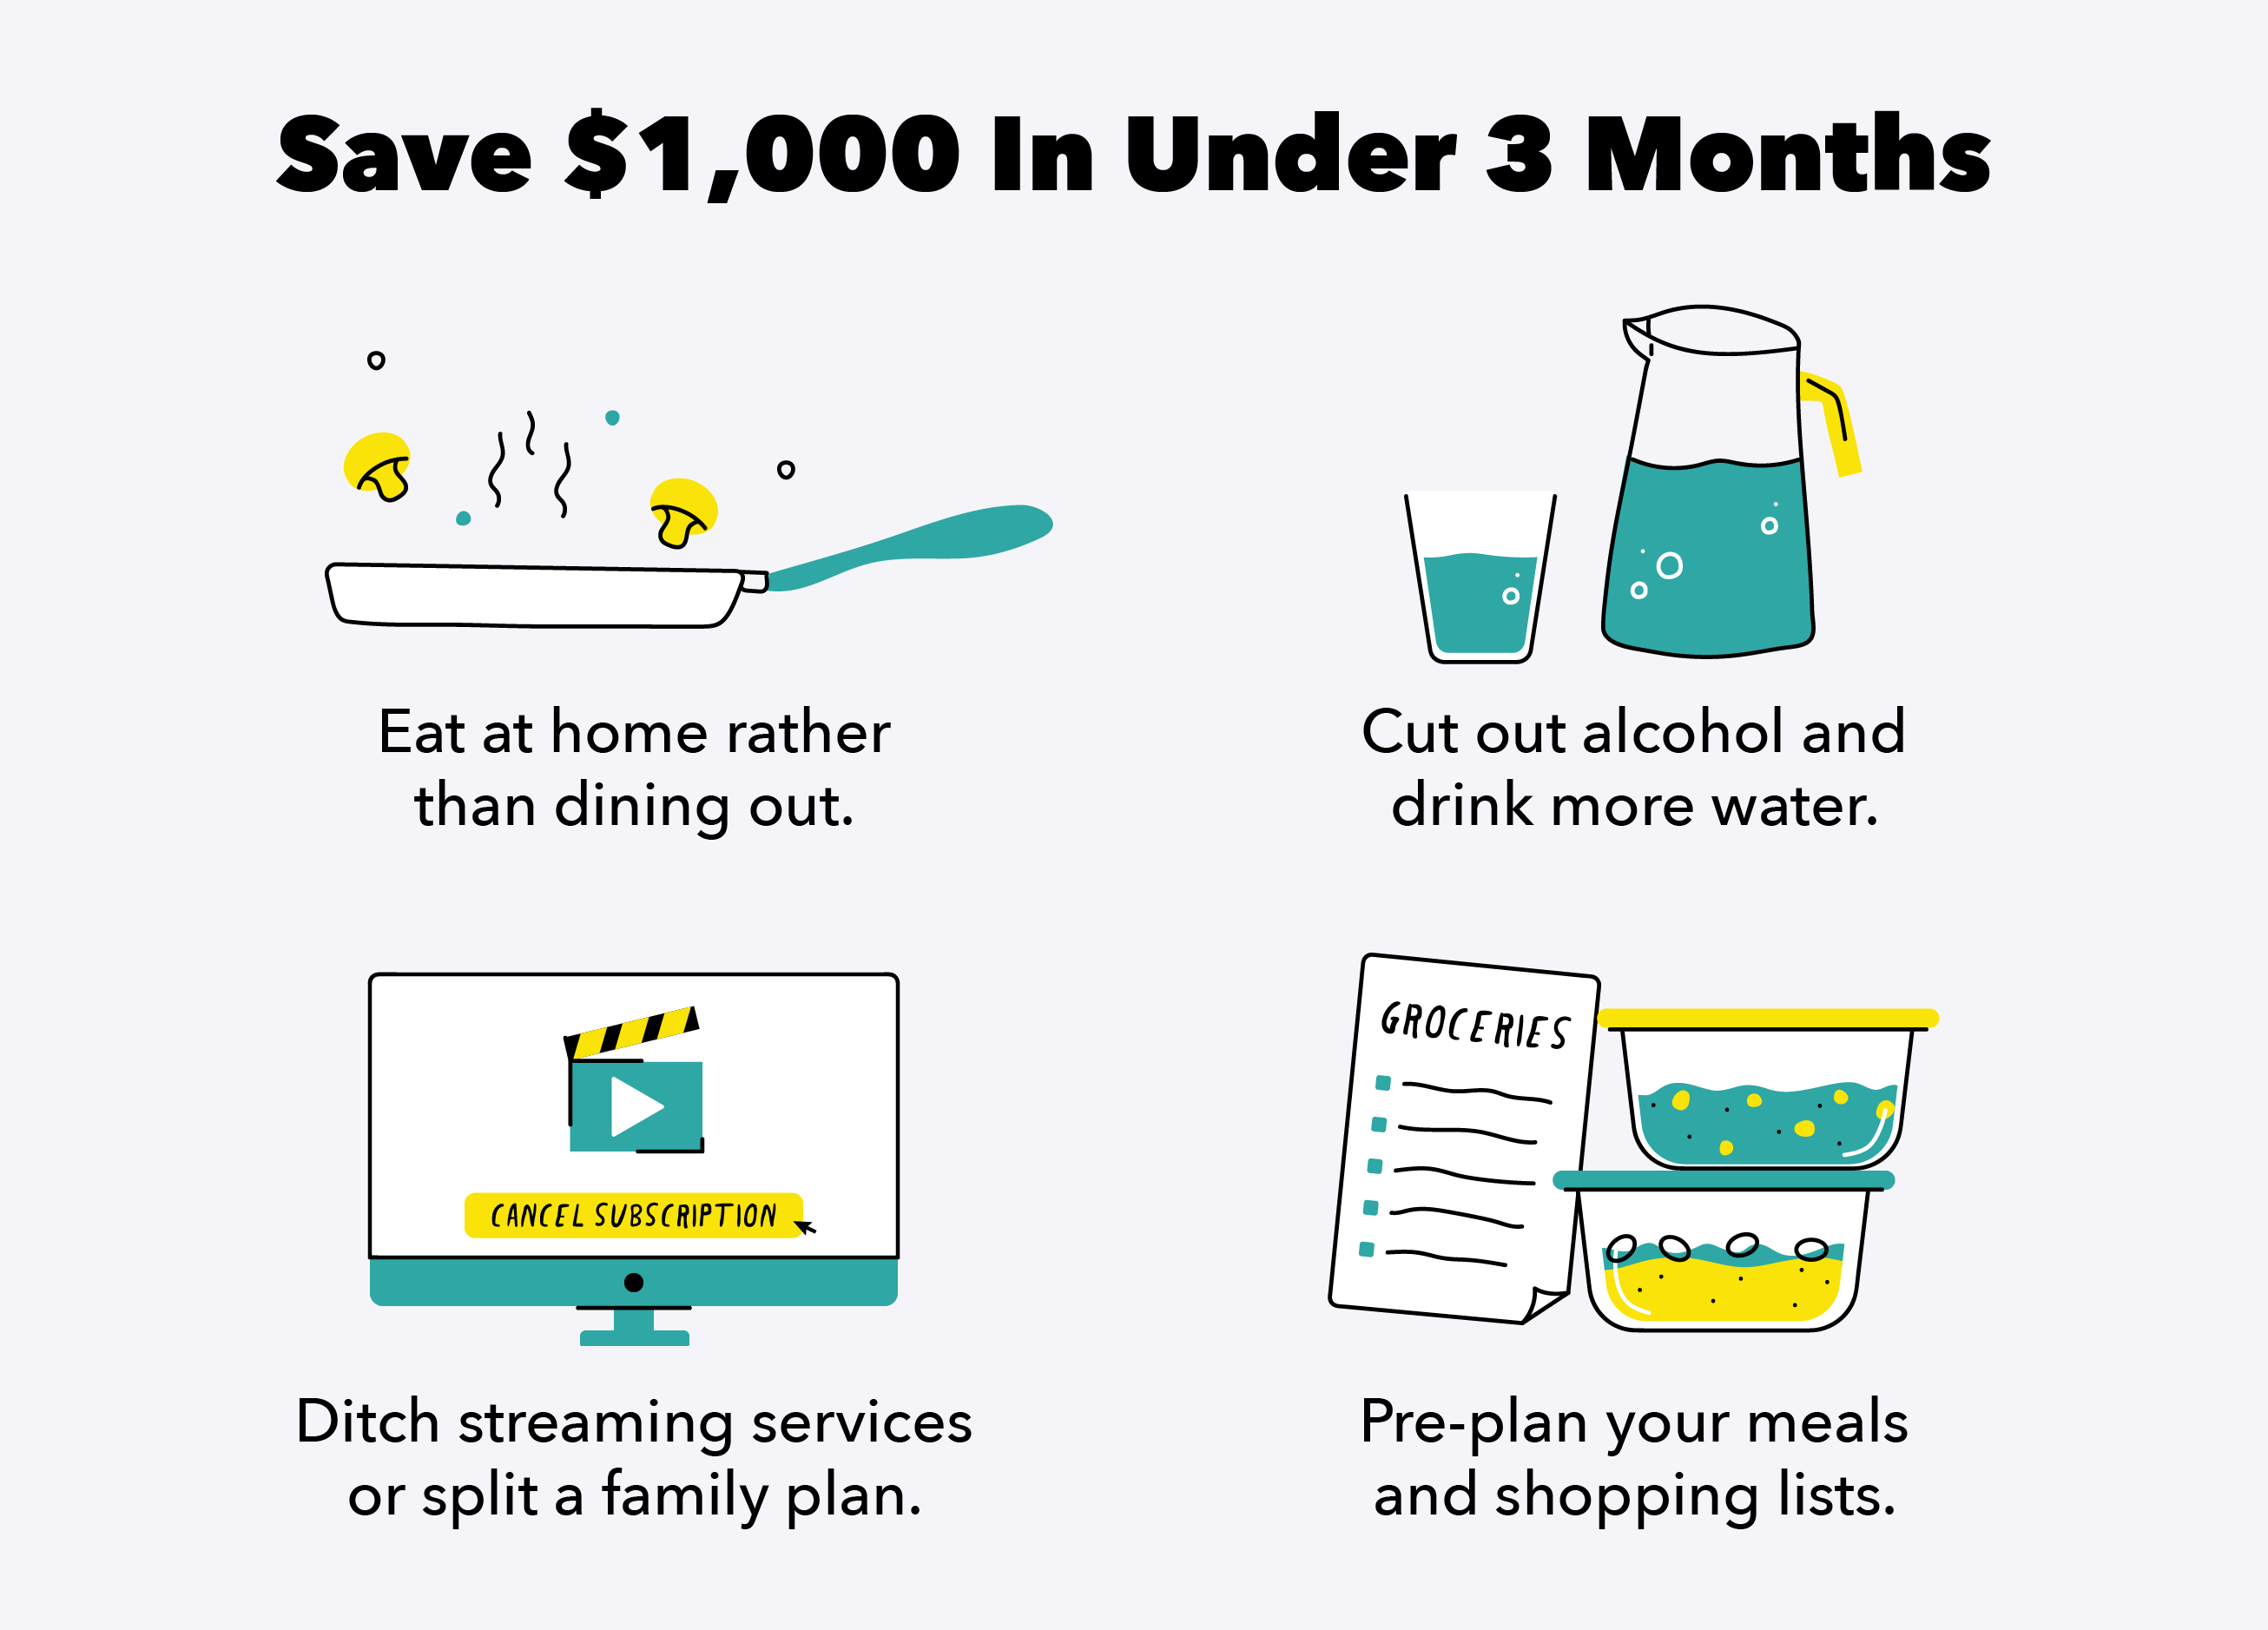 save money for your rainy day fund